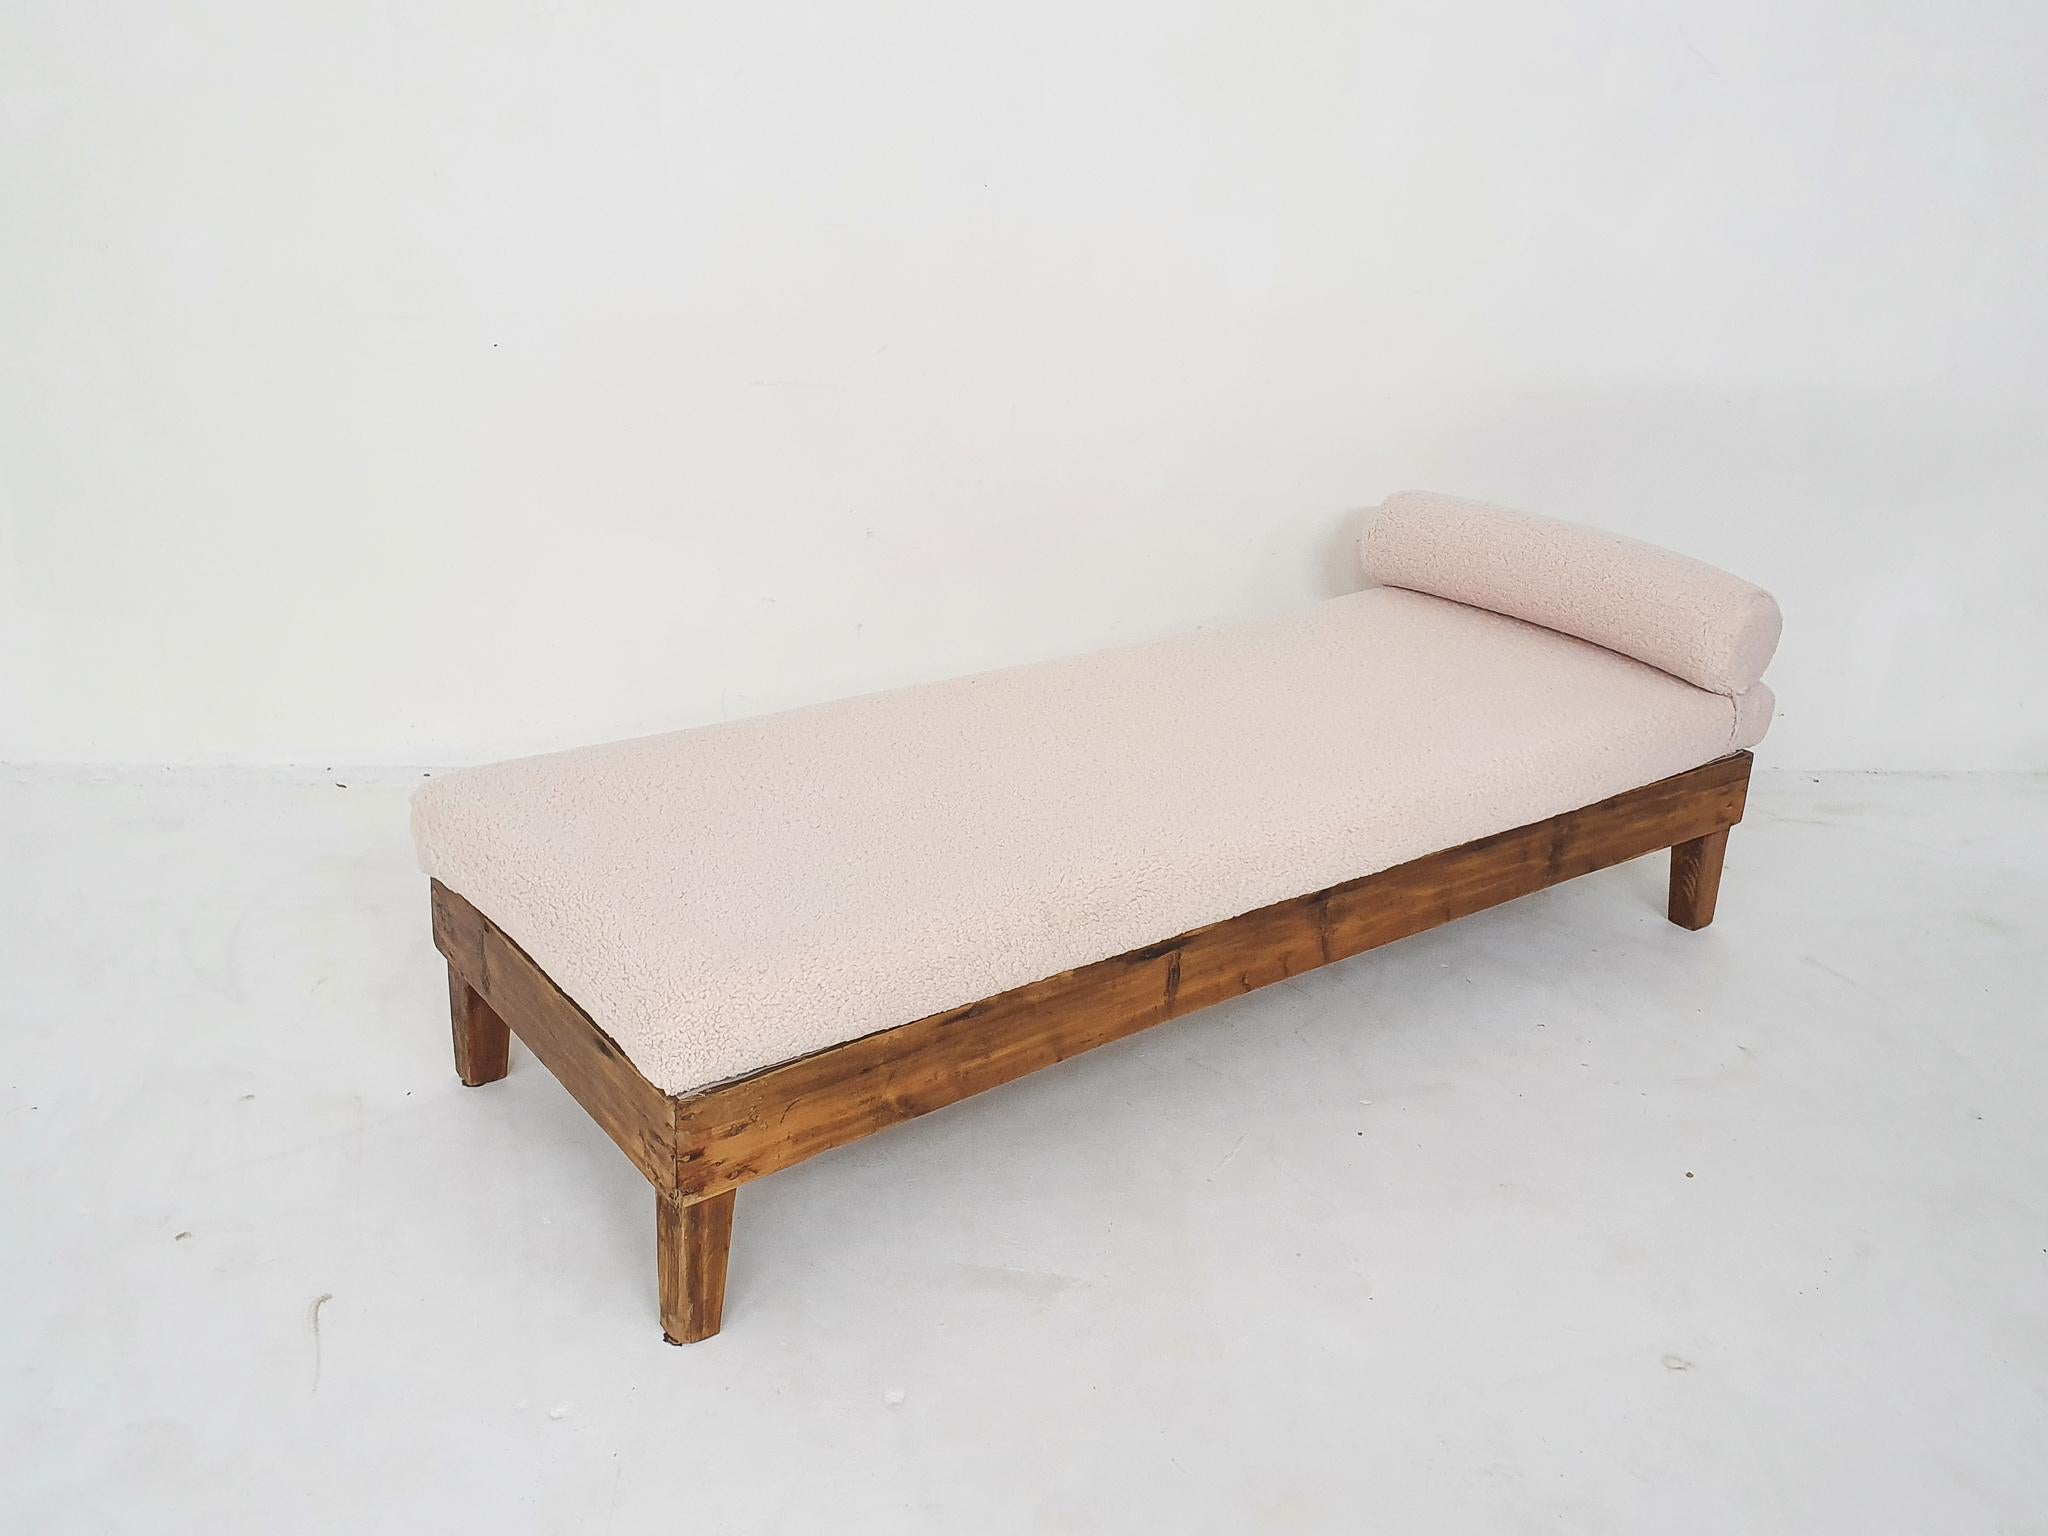 Wooden daybed with new springs and a new matress with off white teddy upholstery.
The wood has some traces of wood worms, but they are no longer active and the wood has been treated against them to be sure.
When replacing the springs we found a